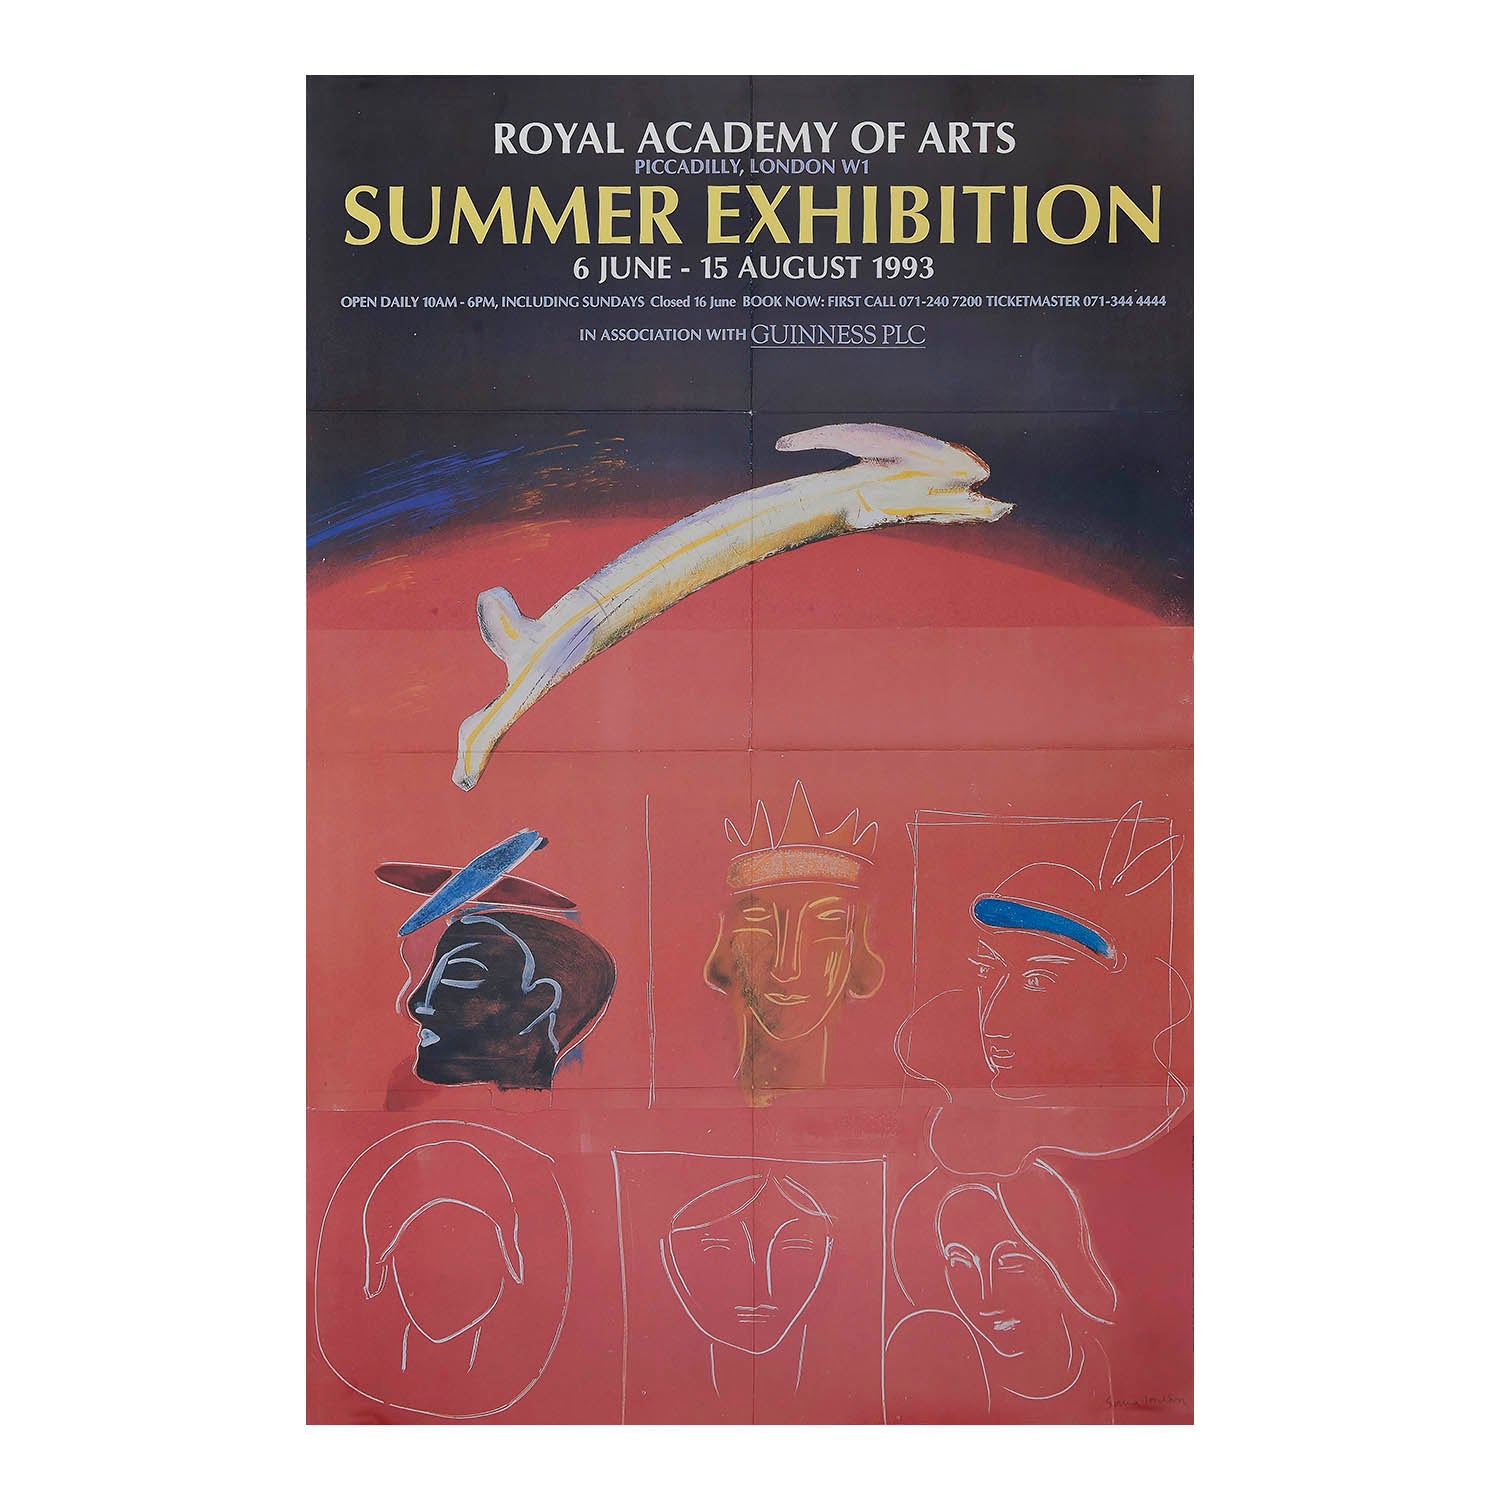 original poster, for the Royal Academy Summer Exhibition in 1993 by Sonia Lawson RA, with layout design by Philip Miles